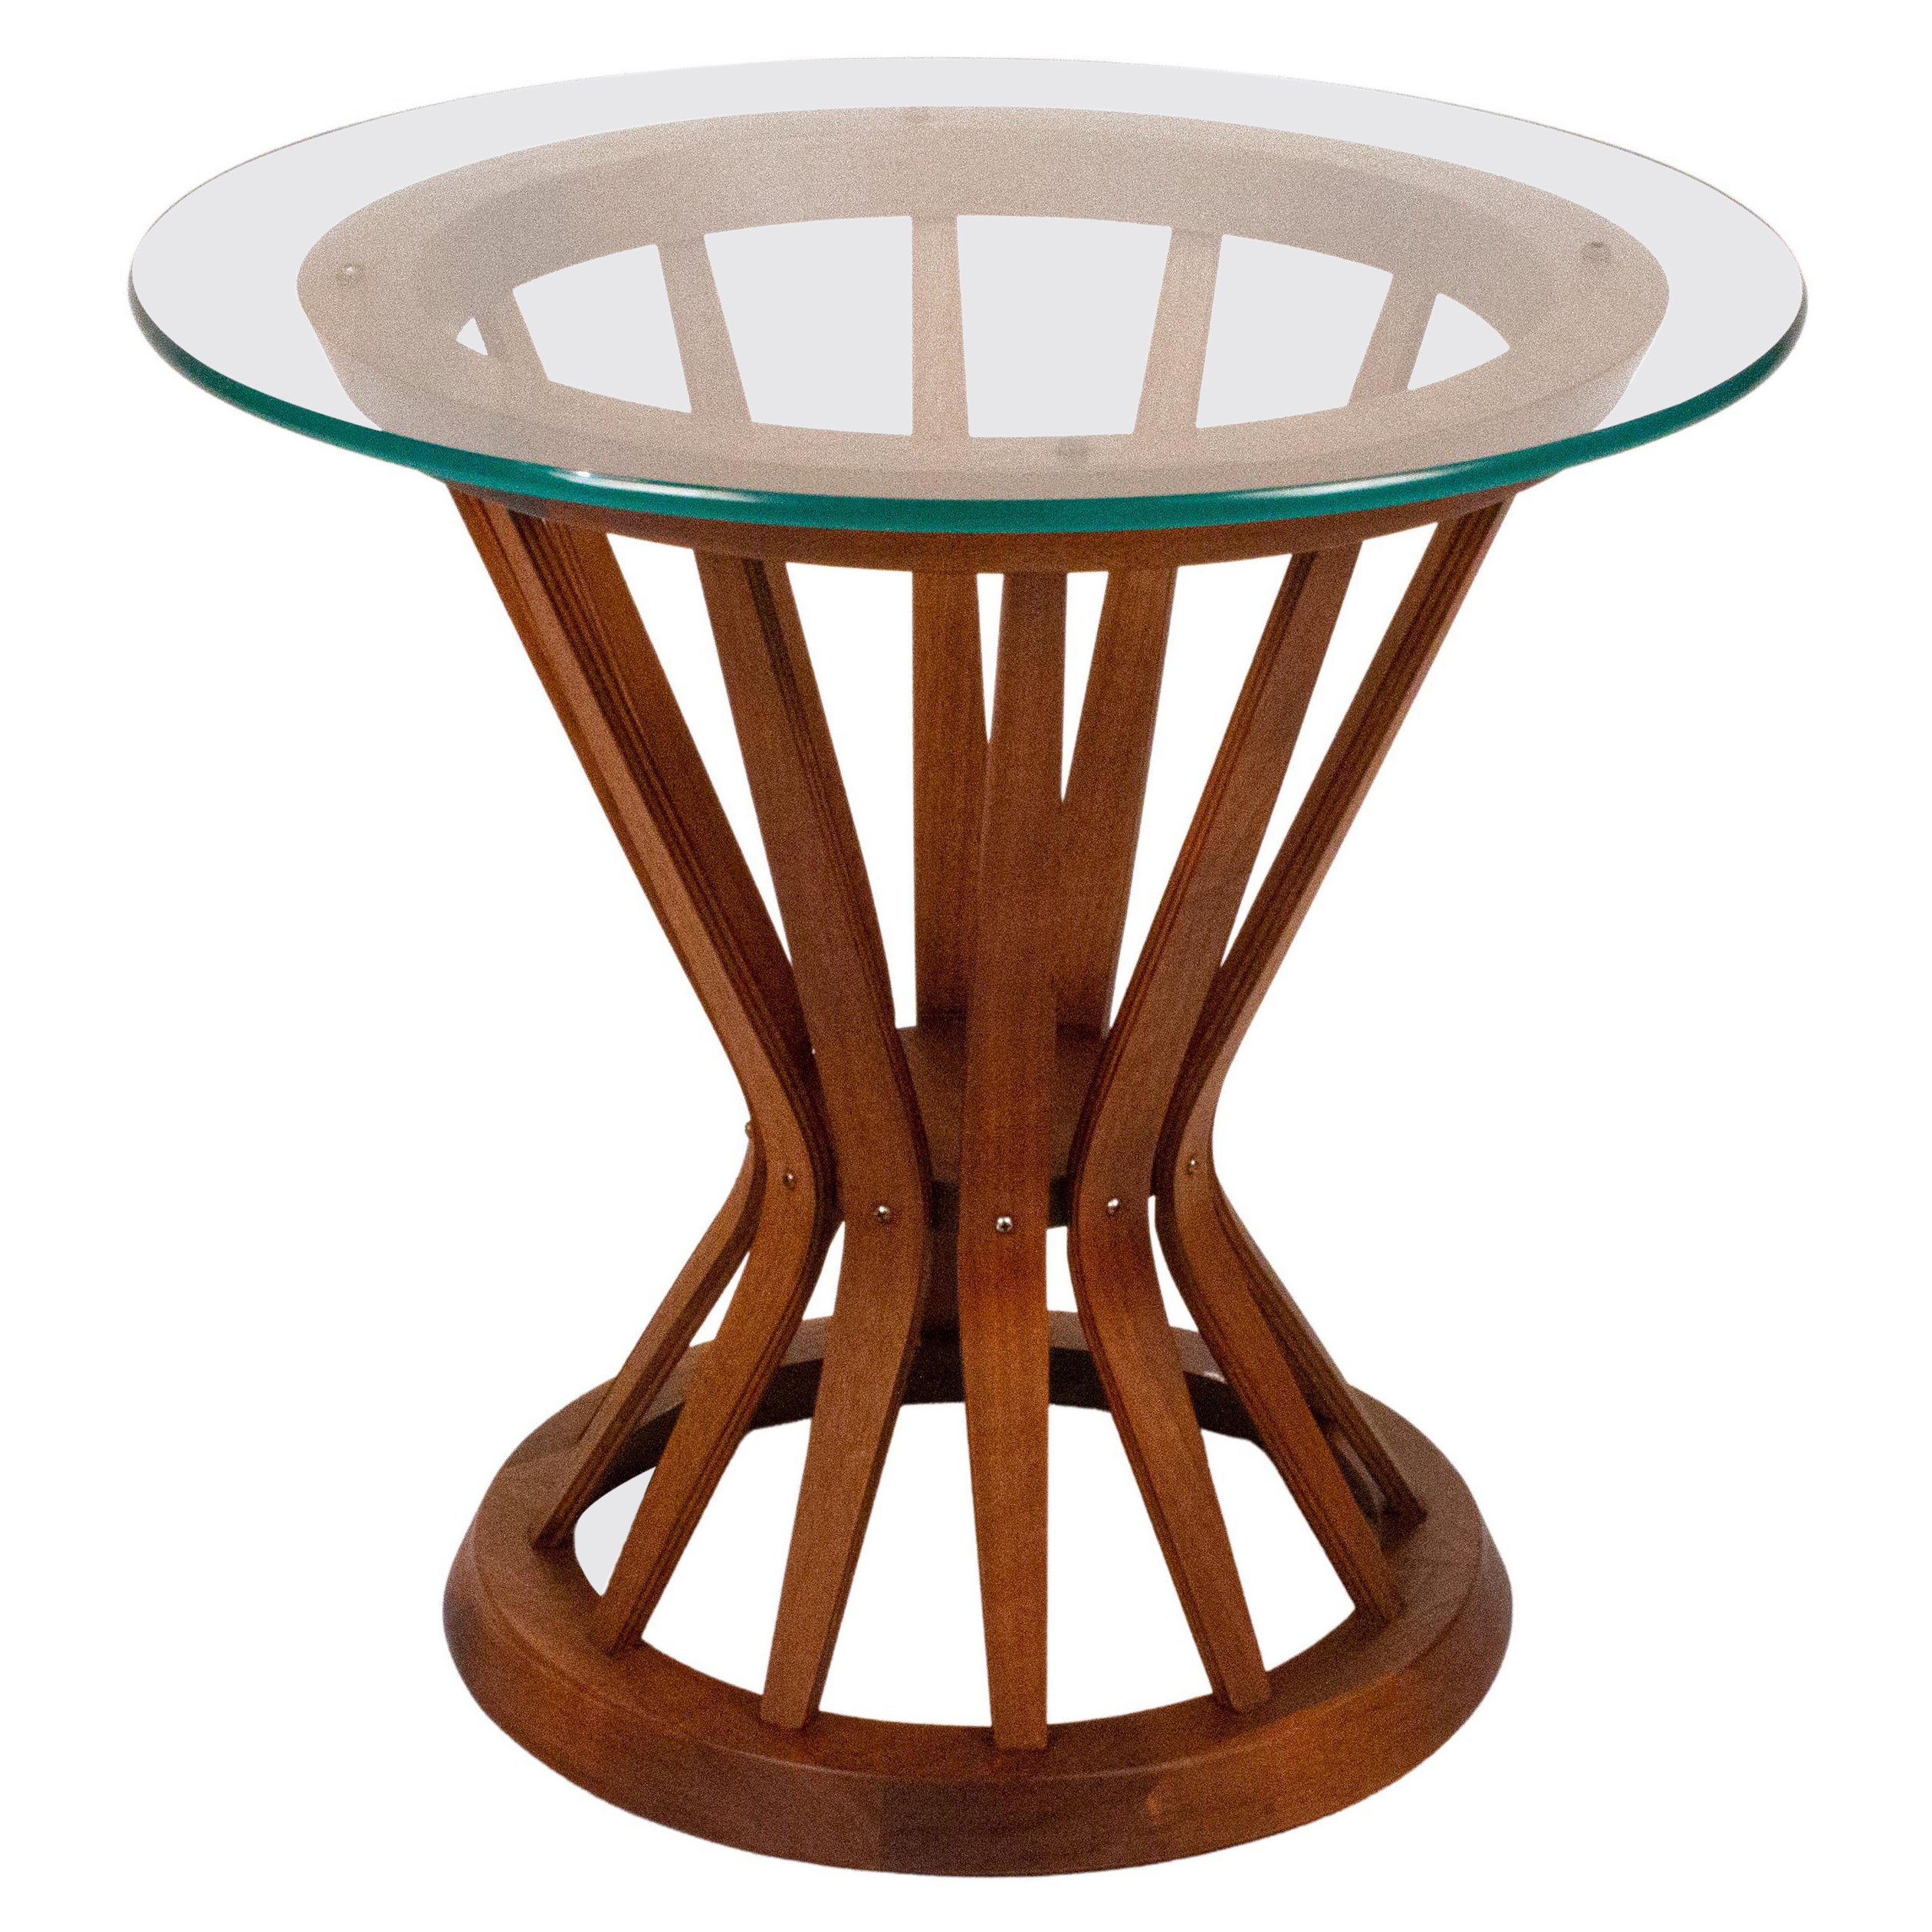 Edward Wormley for Dunbar Sheaf of Wheat Side Table in Mahogany with Glass Top